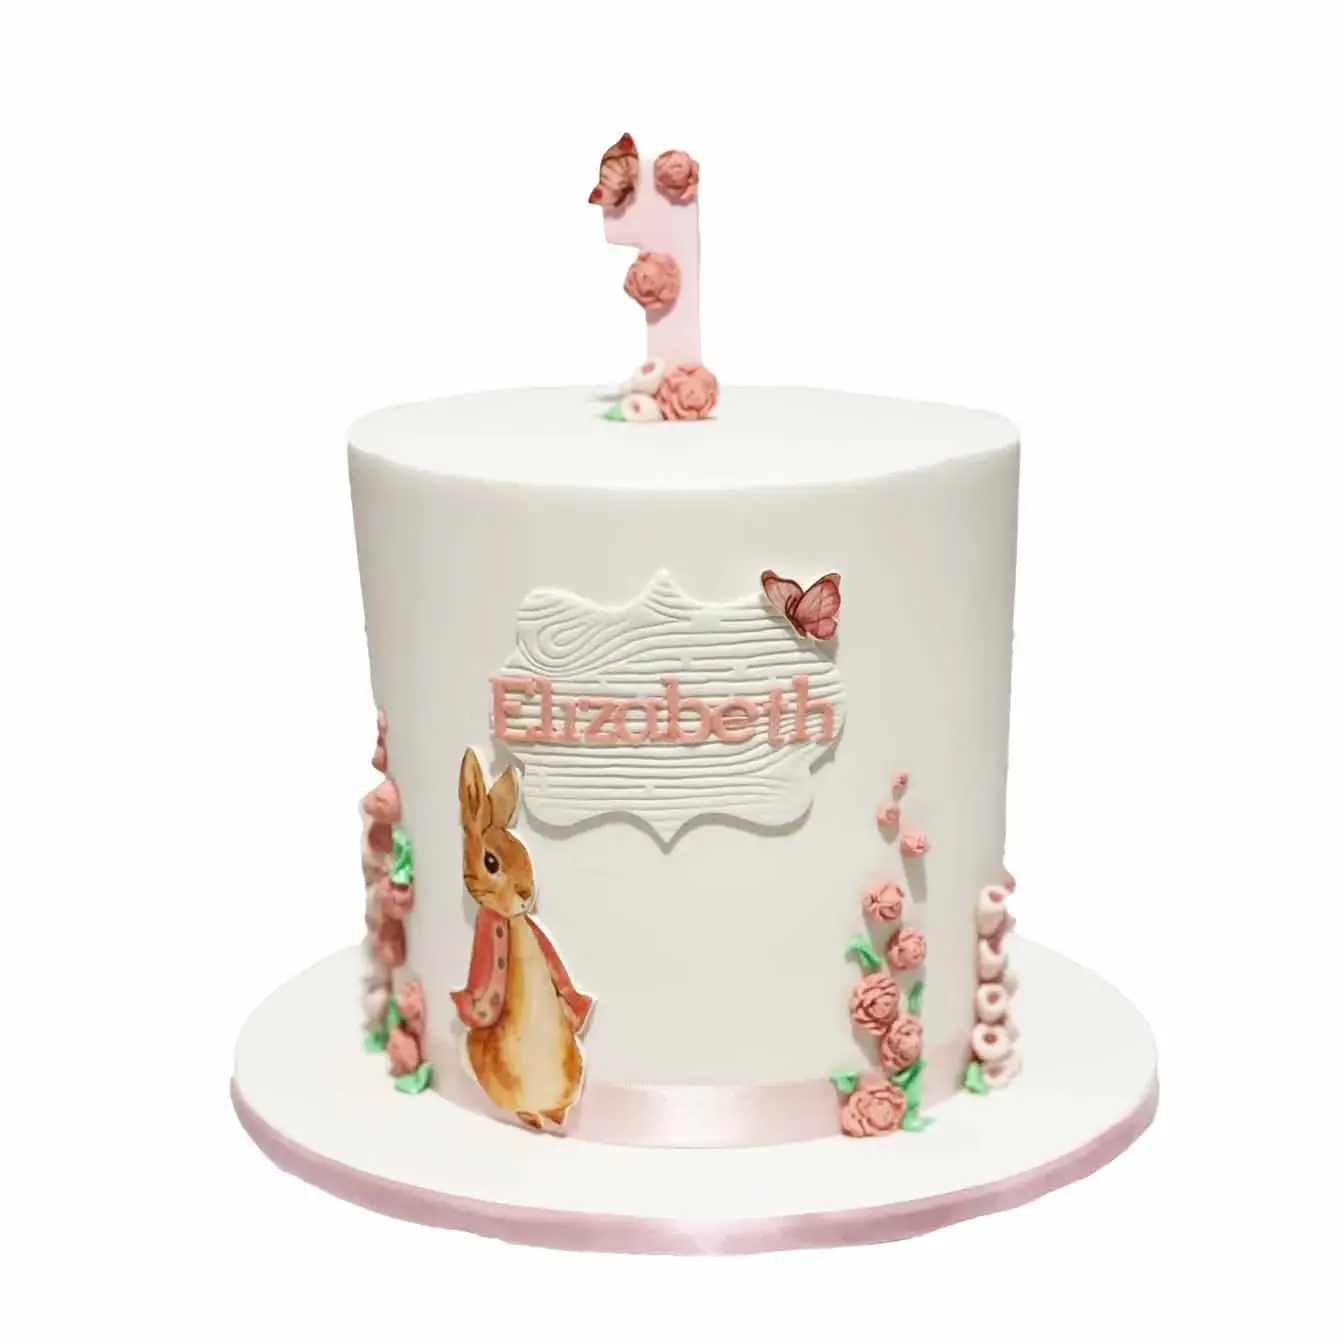 Peter Rabbit's Garden Delight Cake - A pink-themed cake with molded mini roses, a sweet and enchanting centerpiece for birthdays, baby showers, and fans of the classic tale.